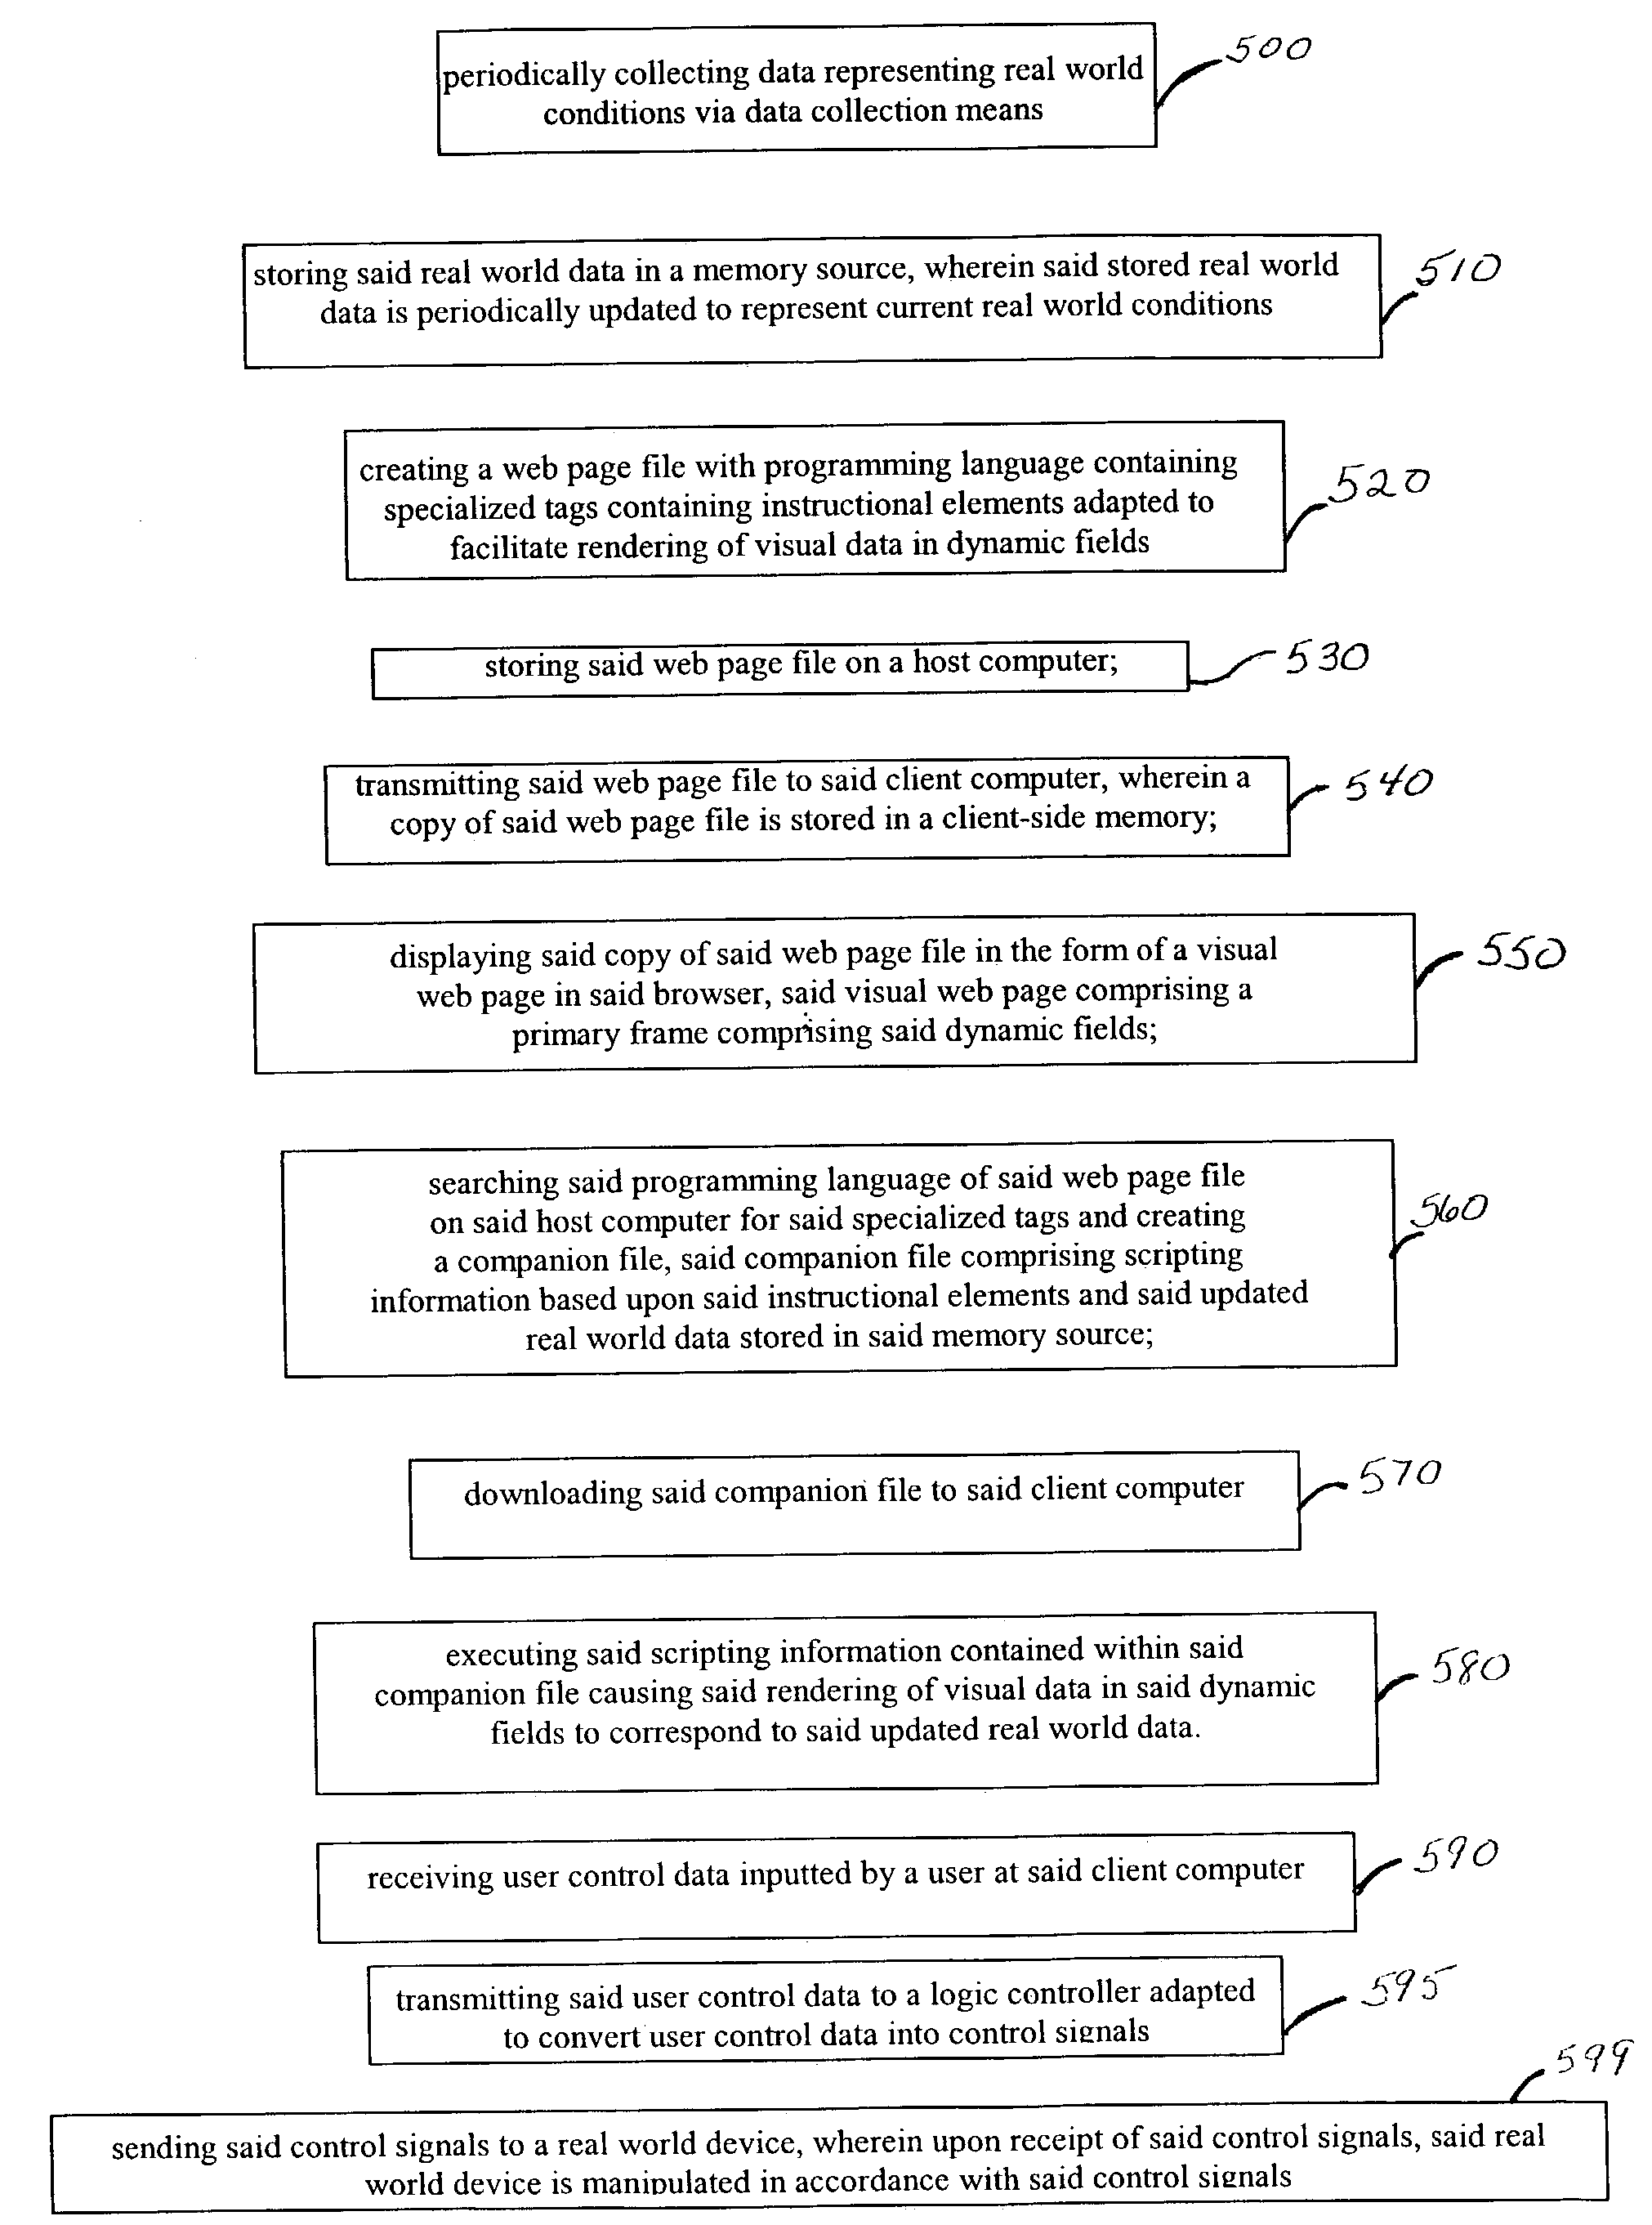 Method and apparatus for dynamically displaying real world data in a browser setting